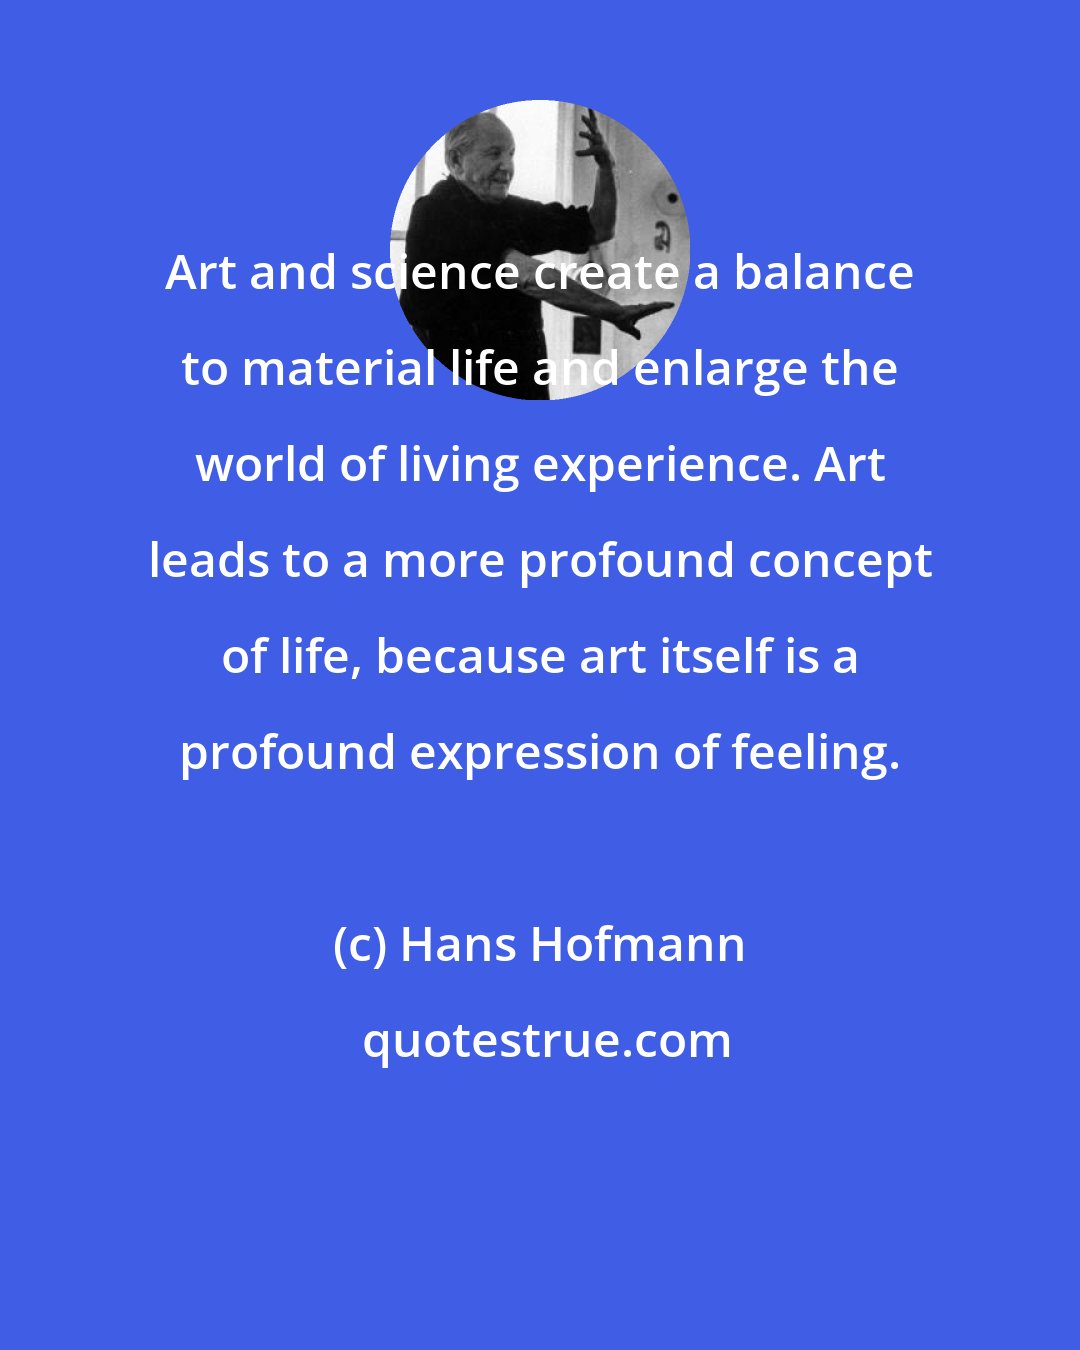 Hans Hofmann: Art and science create a balance to material life and enlarge the world of living experience. Art leads to a more profound concept of life, because art itself is a profound expression of feeling.